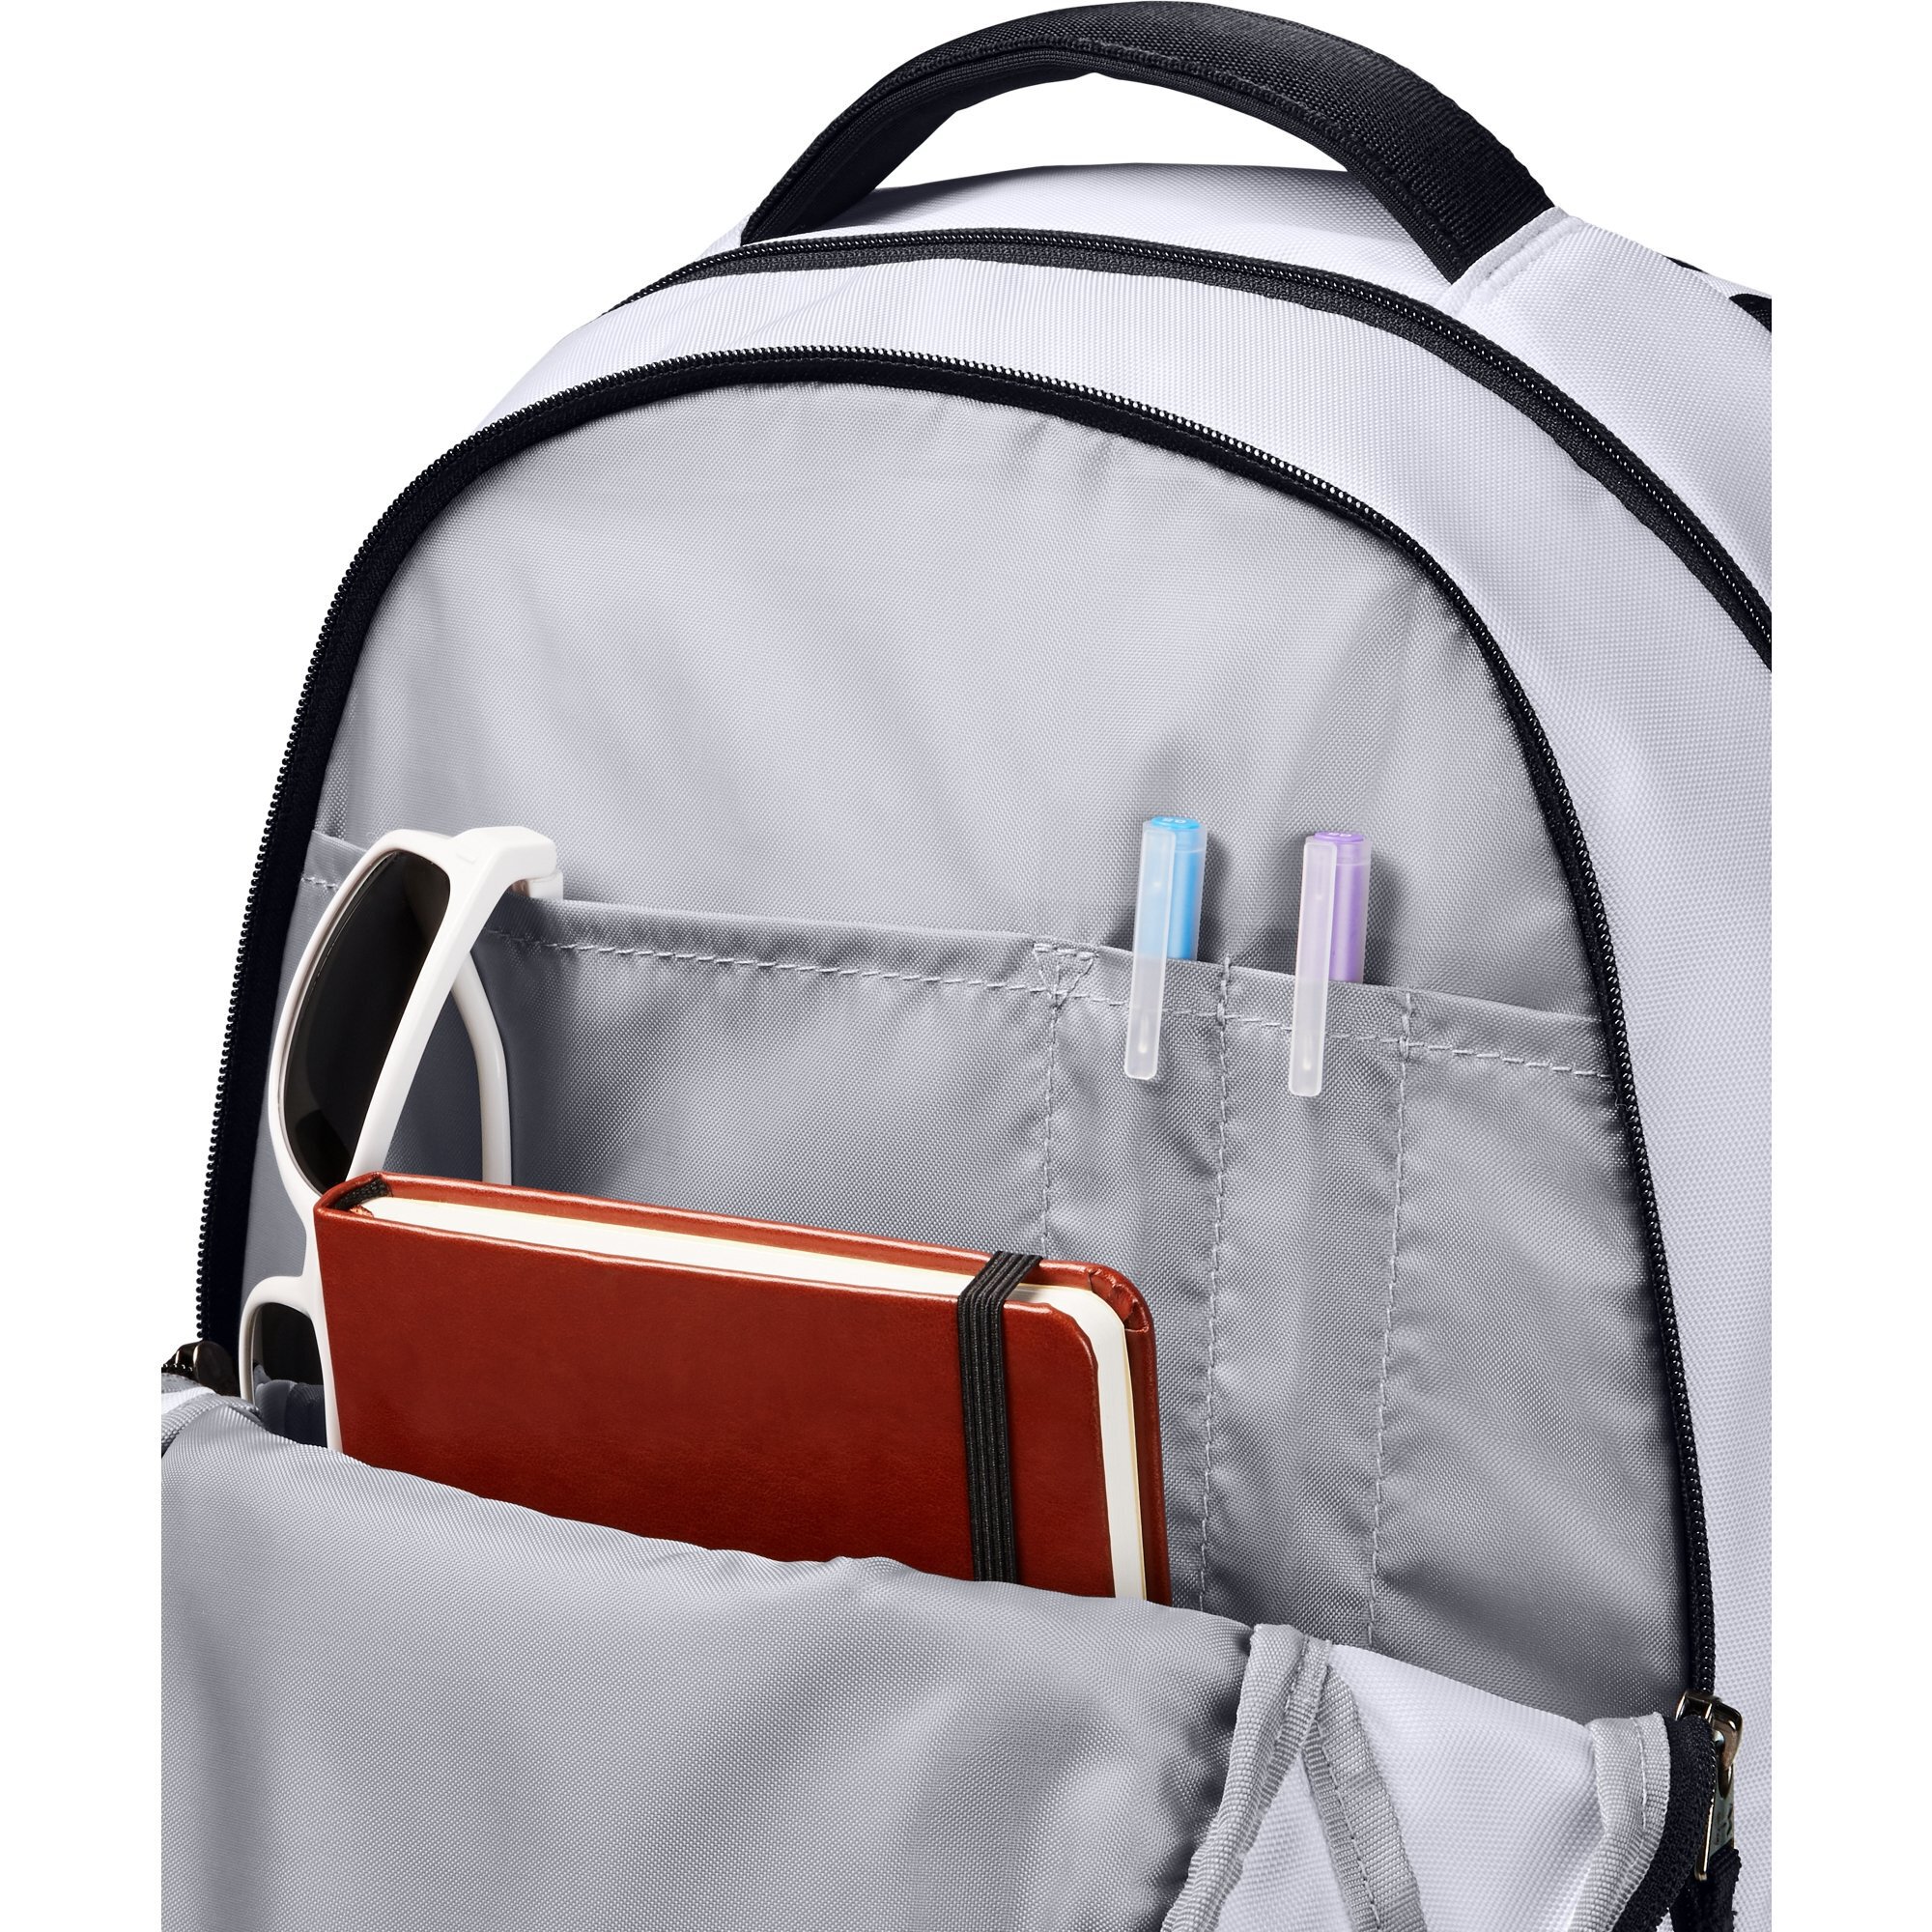 Under Armour Hustle Backpack, White - image 3 of 5